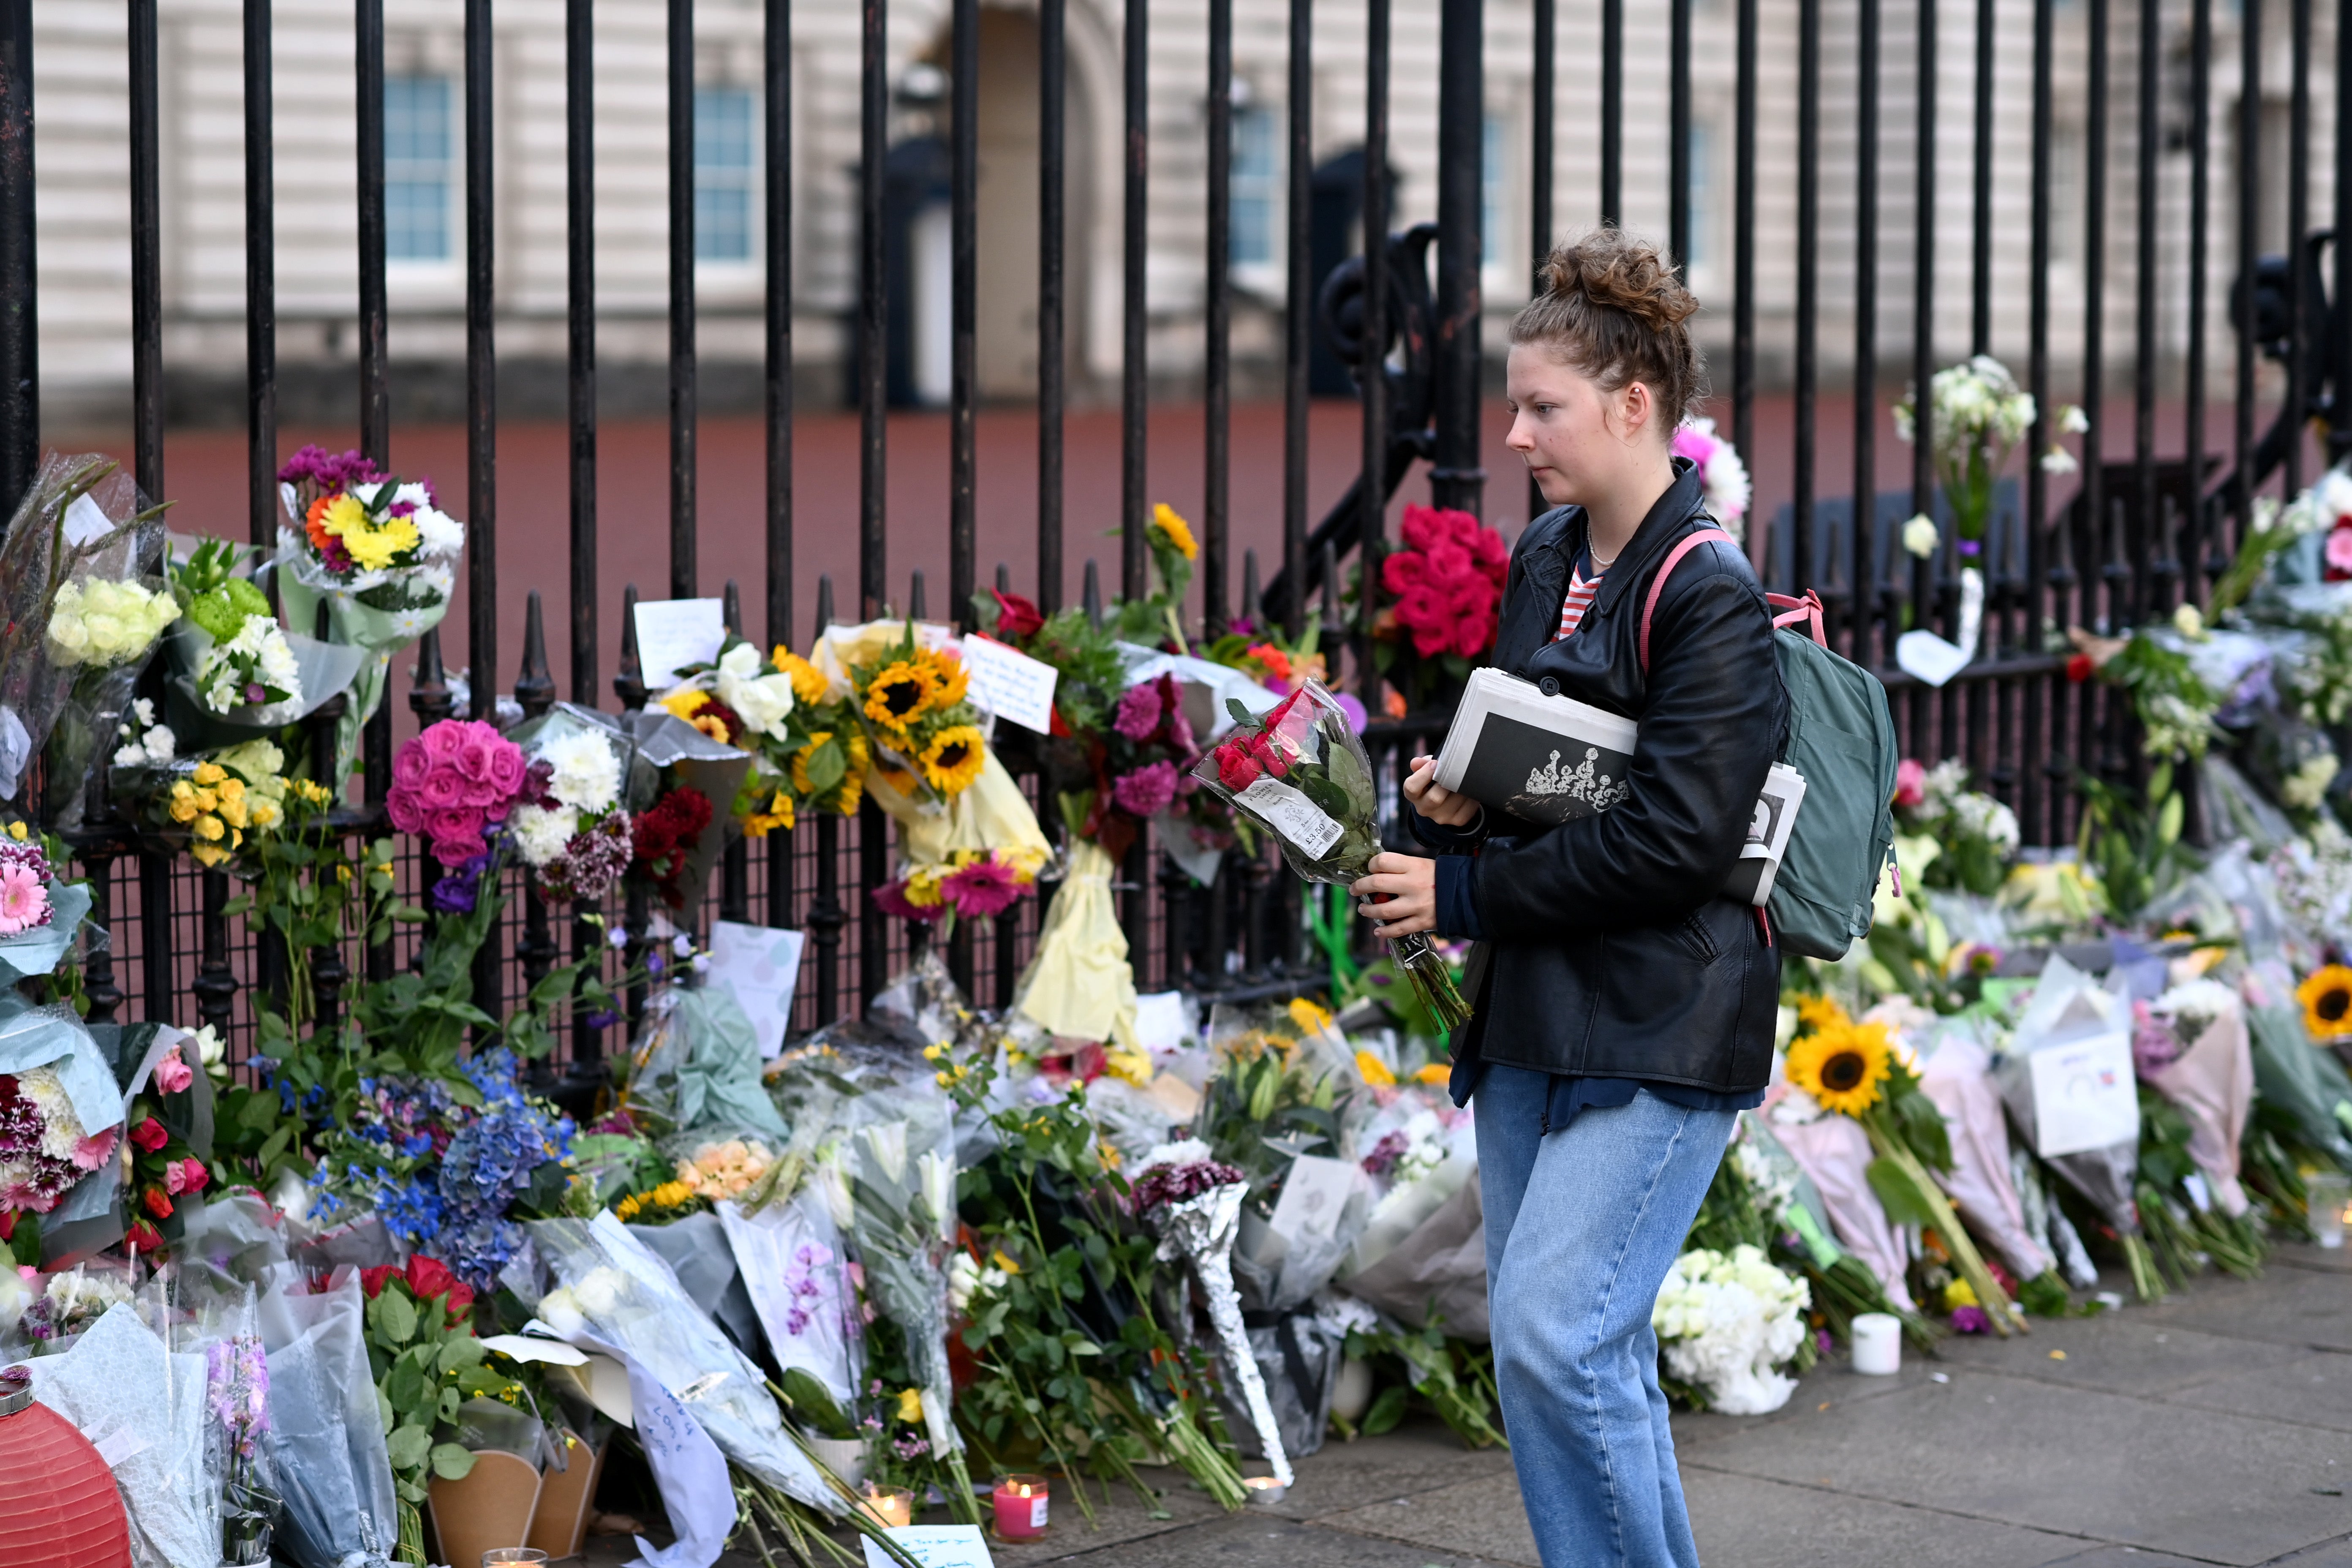 Flowers are laid outside Buckingham Palace following the death of Queen Elizabeth II.